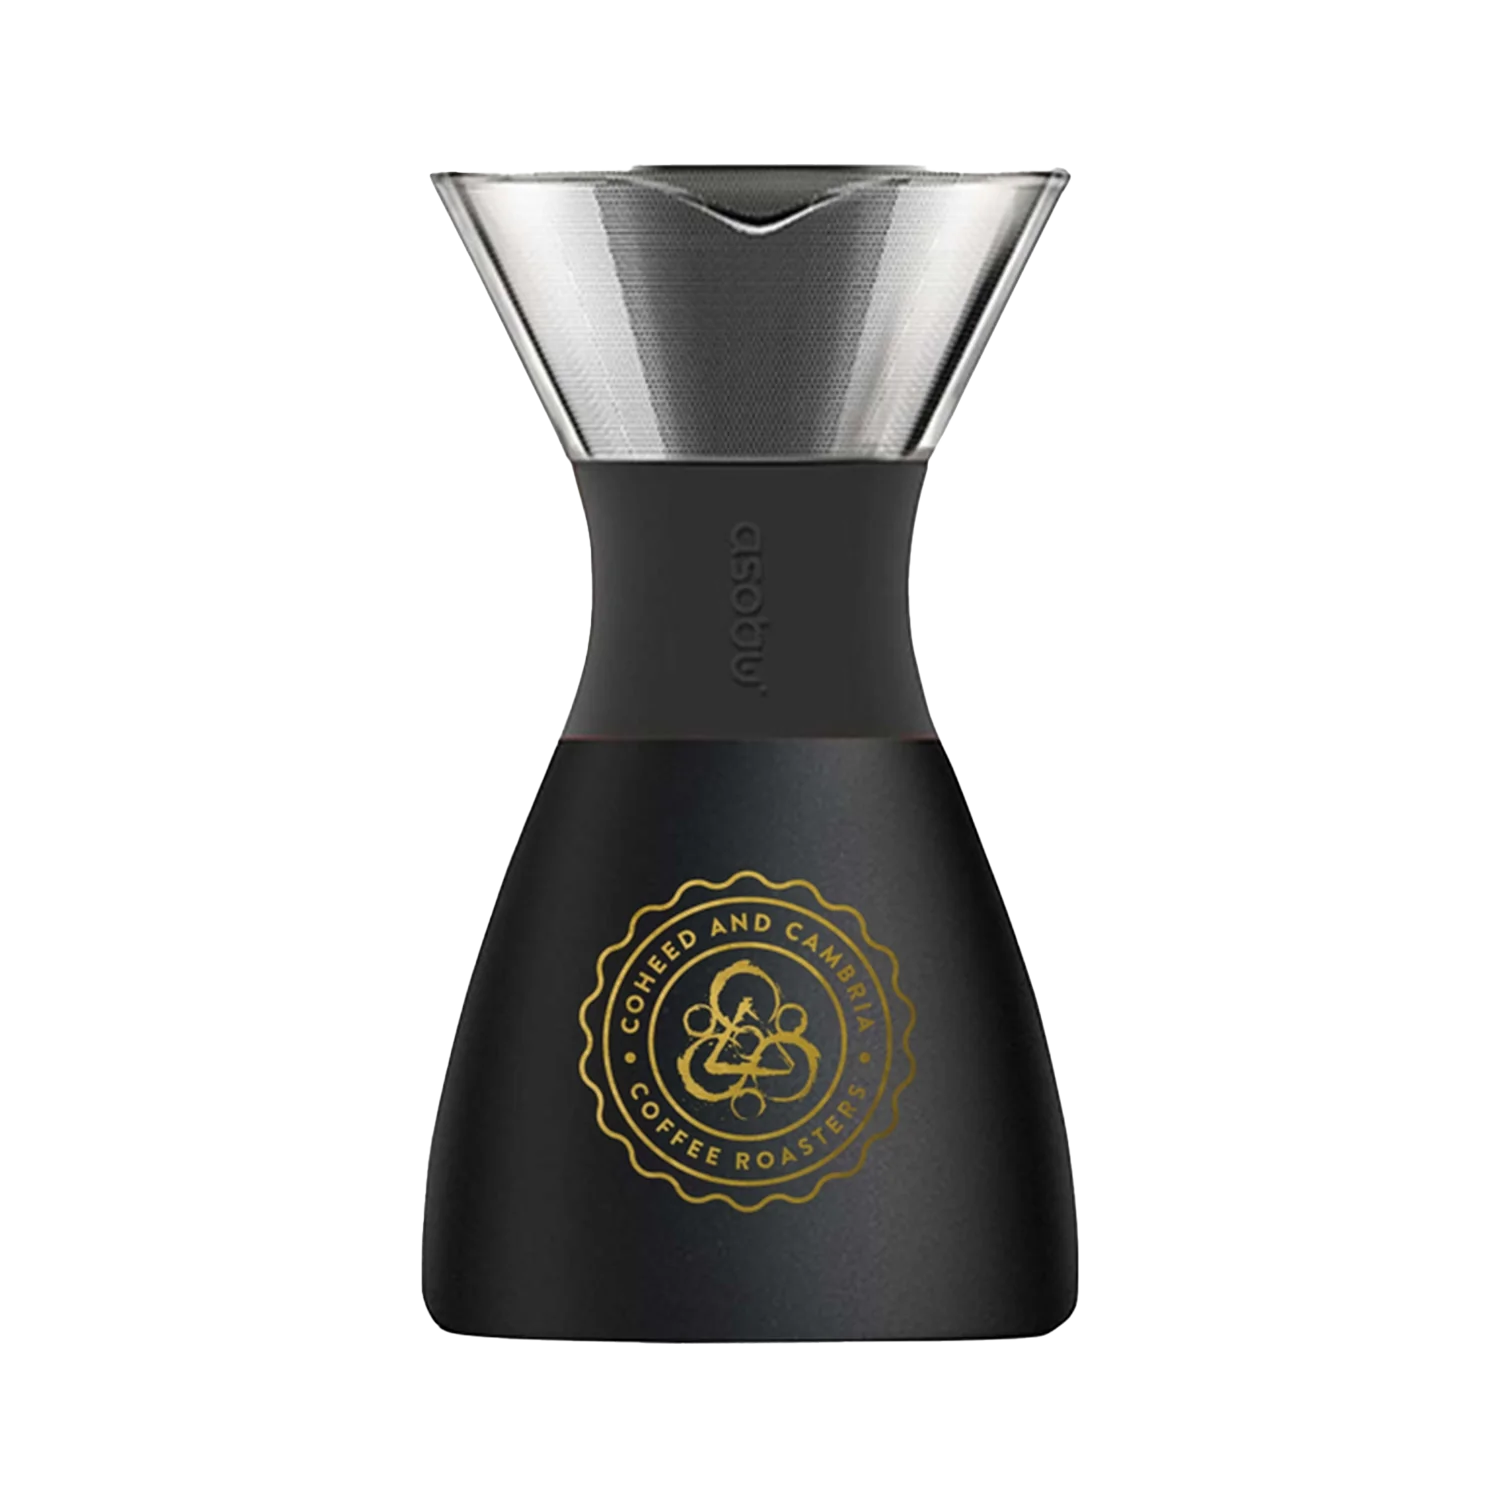 CCCR Black Insulated Pour Over Coffee Maker/Carafe